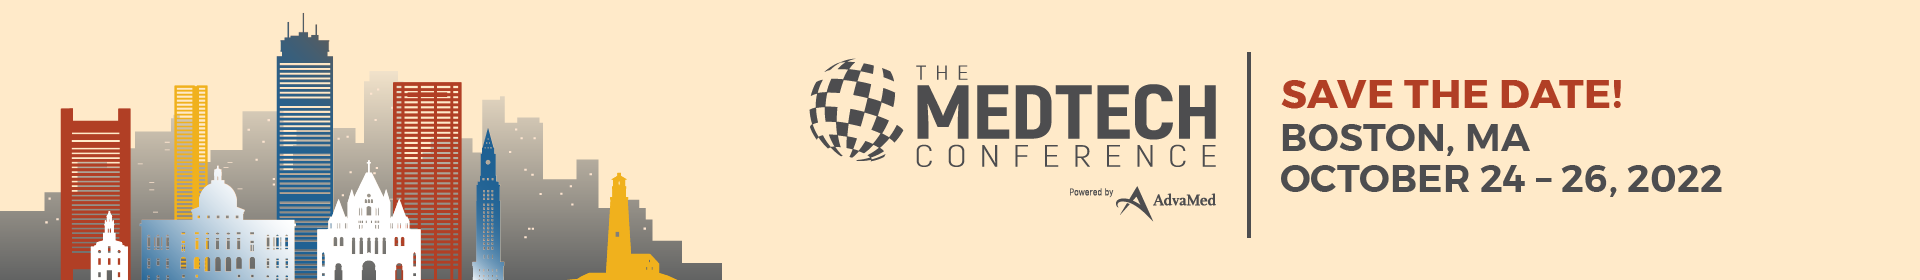 The MedTech Conference 2022 Event Banner